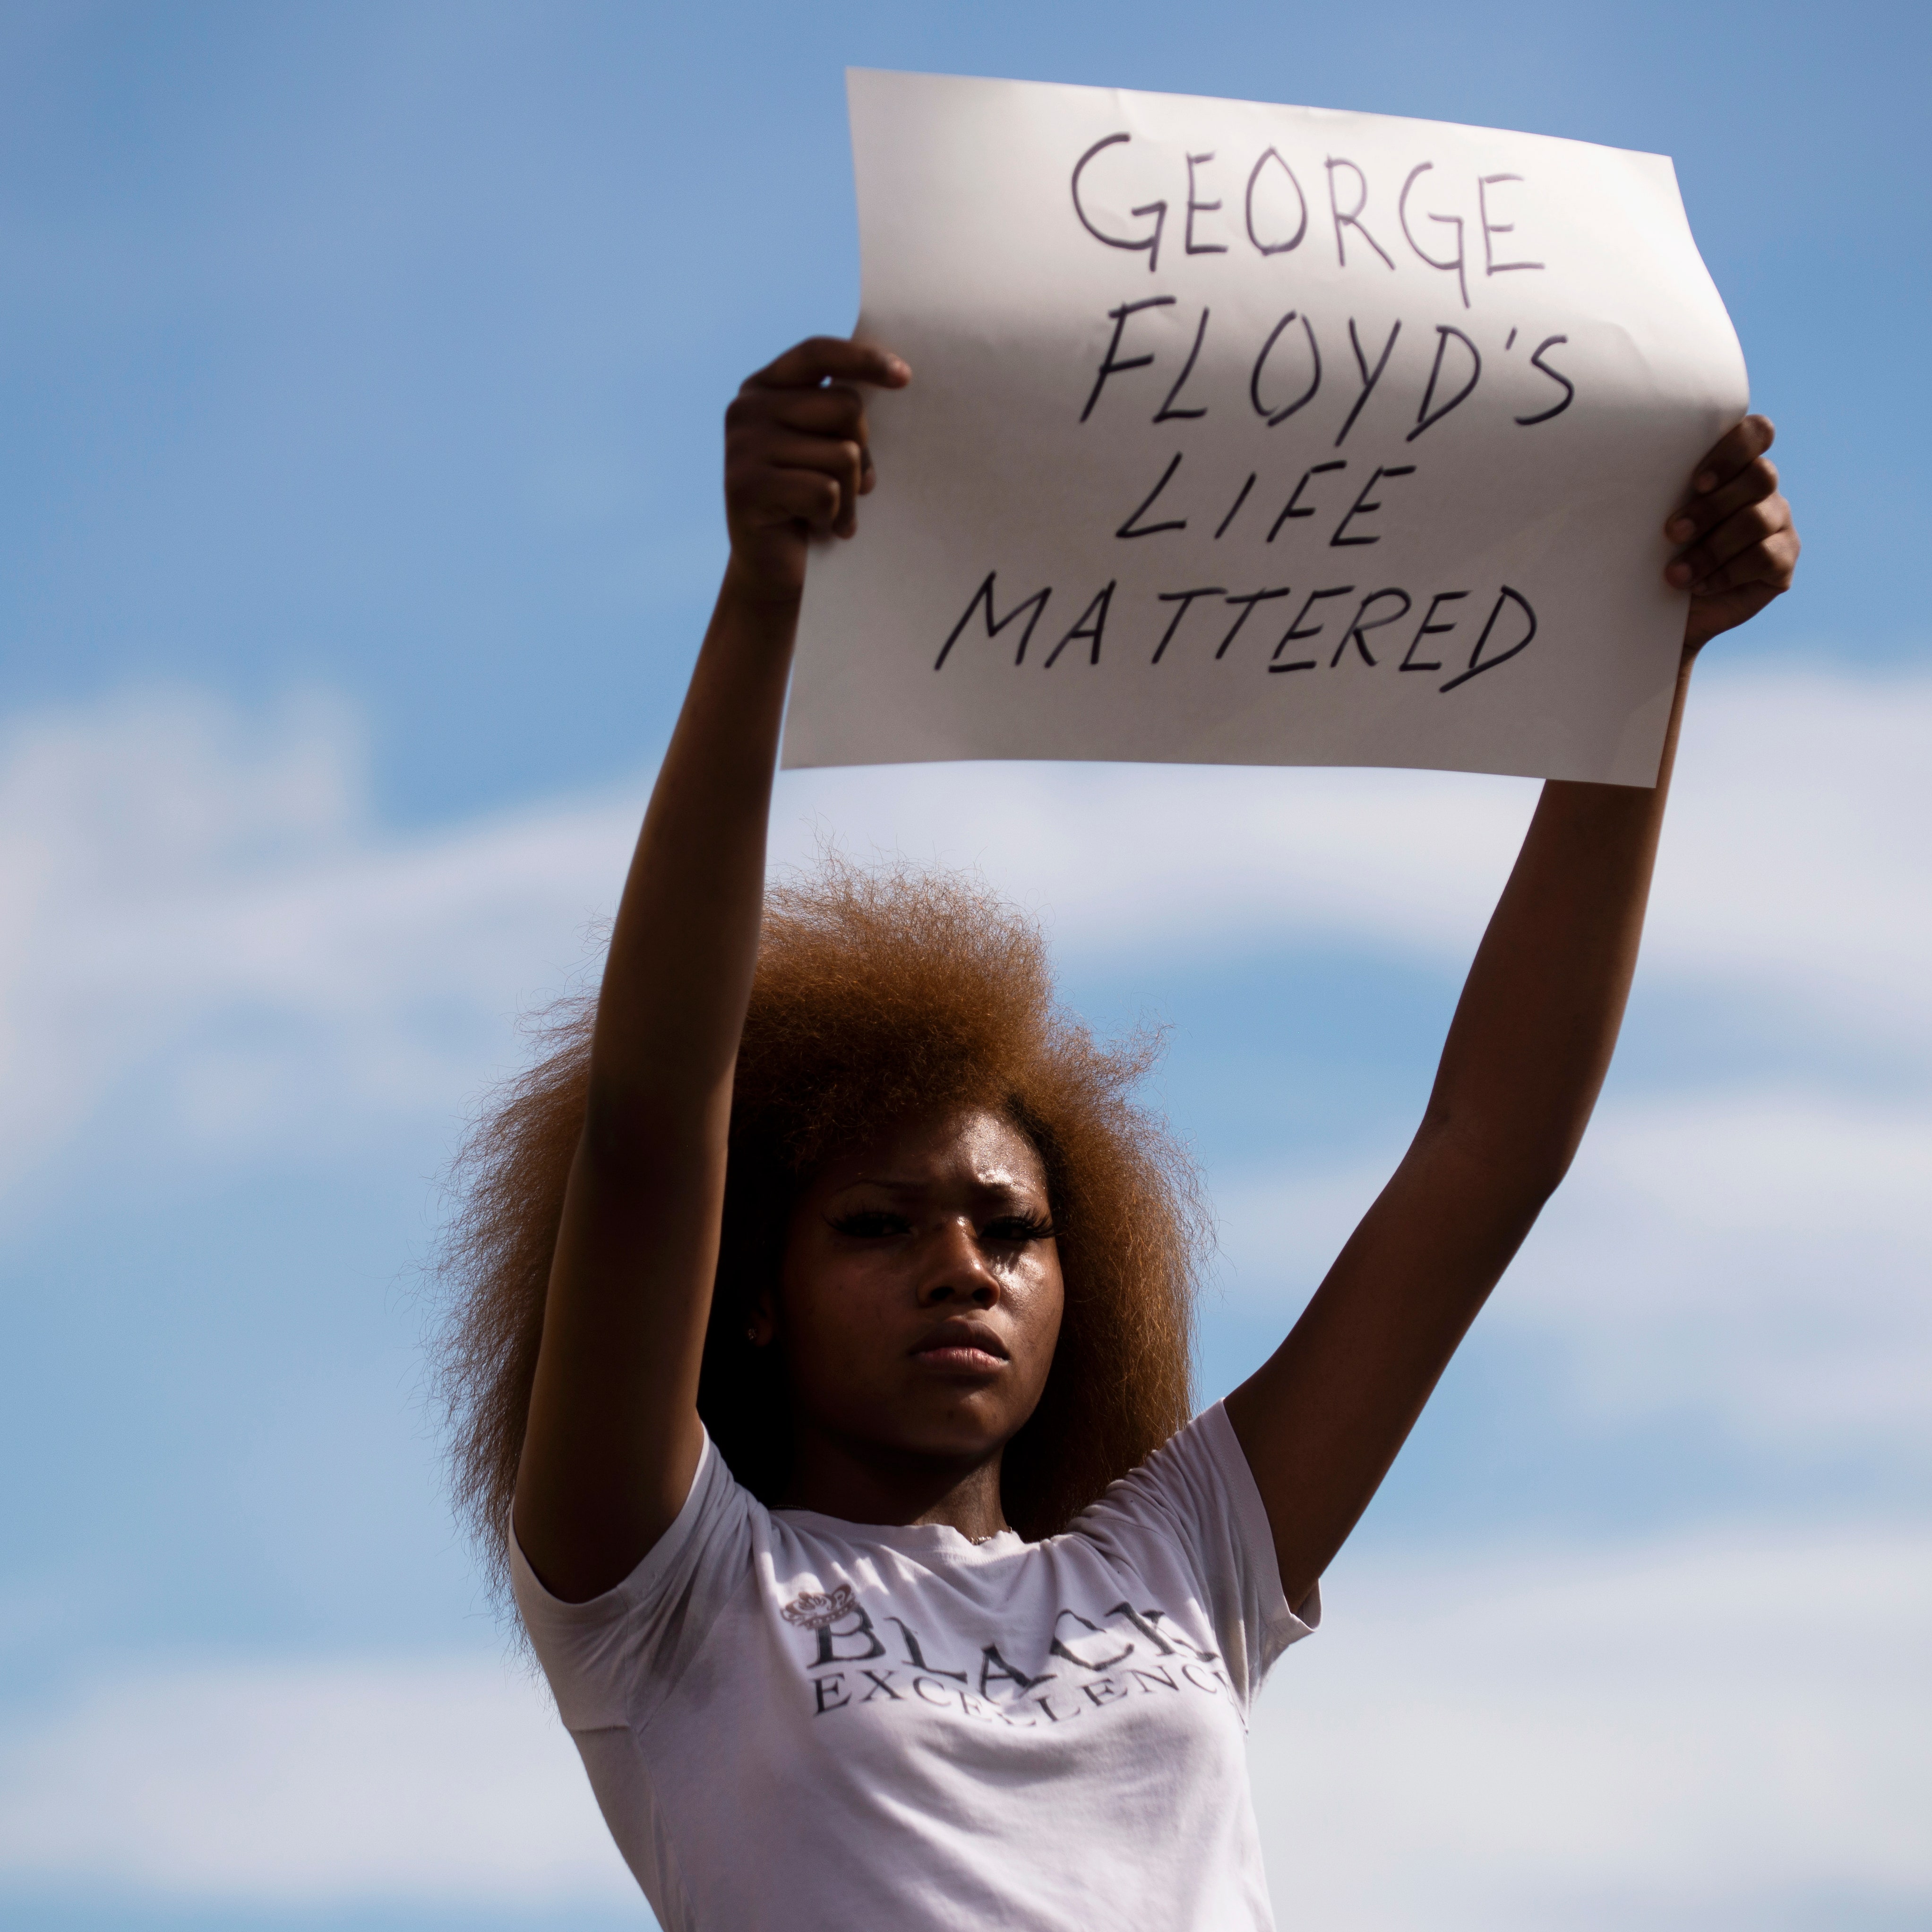 MINNEAPOLIS MN  MAY 26 A woman holds a sign stating George Floyd's Life Mattered during a protest outside the Cup Foods...